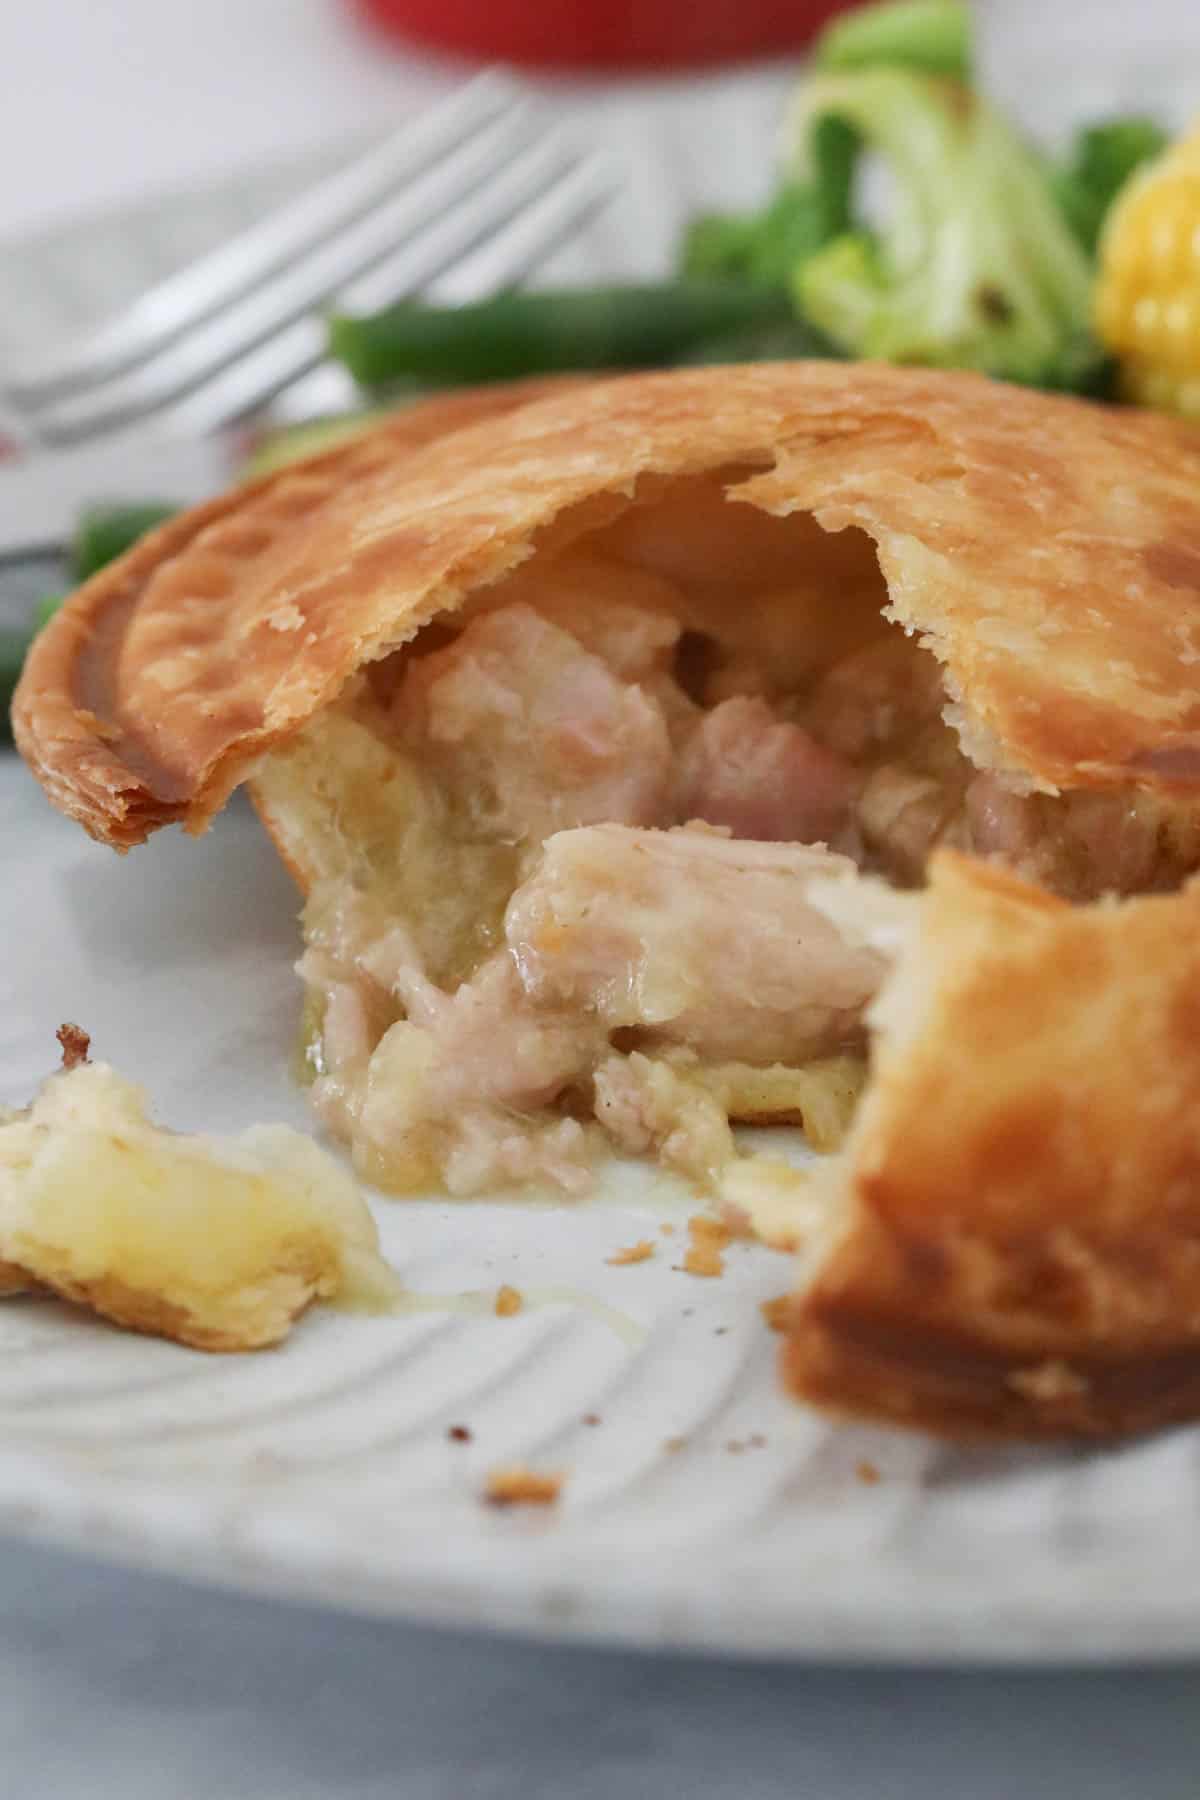 A chicken pie cooked in the pie maker.